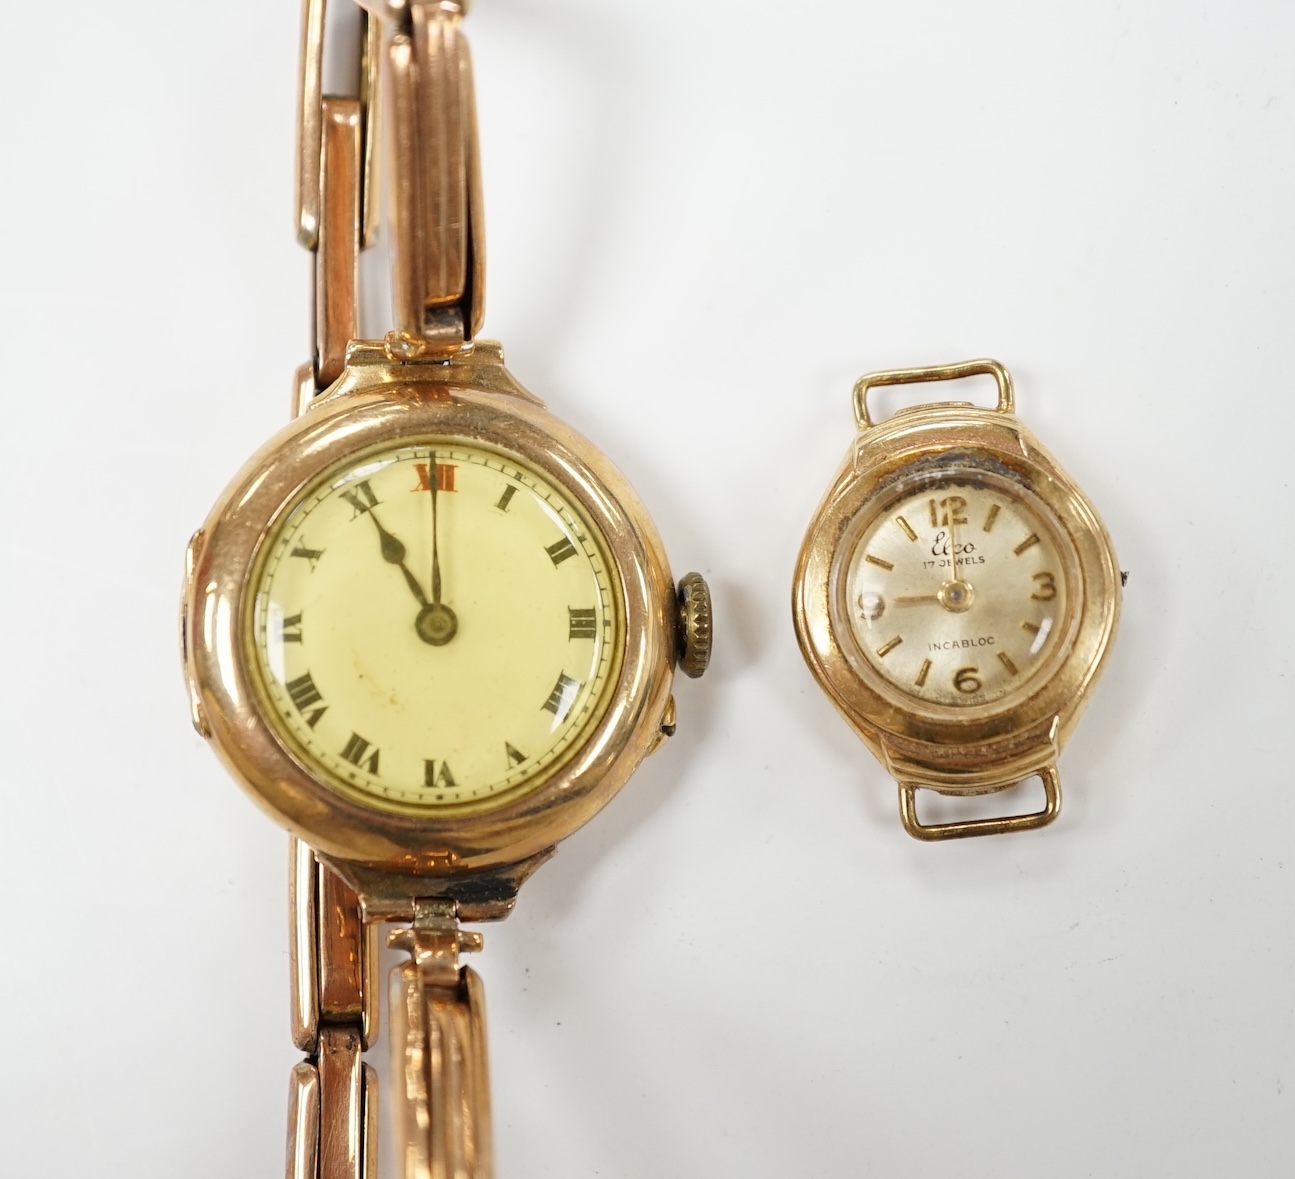 A lady's early 20th century 9ct gold manual wind wrist watch, on a 9ct expanding bracelet, gross weight 19.4 grams, together with a lady's 9ct gold Elco watch. Condition - poor                                            